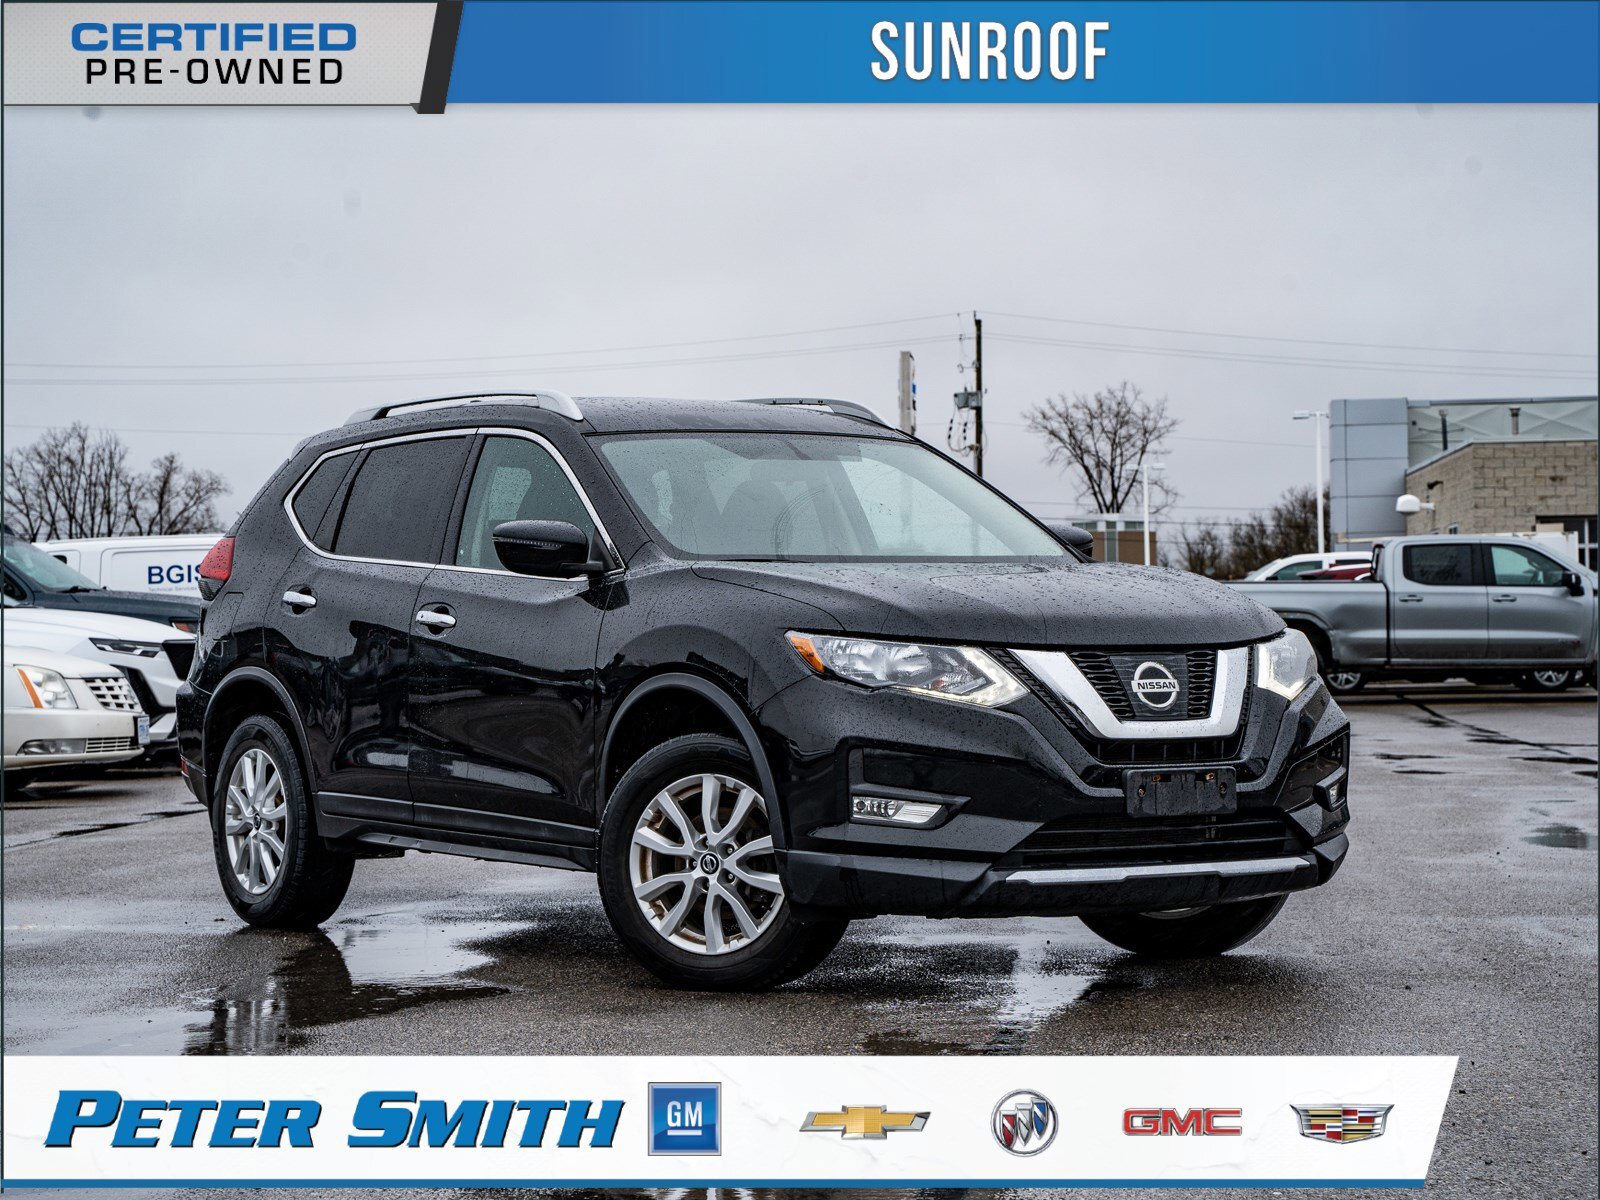 2017 Nissan Rogue SV - 2.5L DOHC I4 | Sunroof | Heated Front Seats